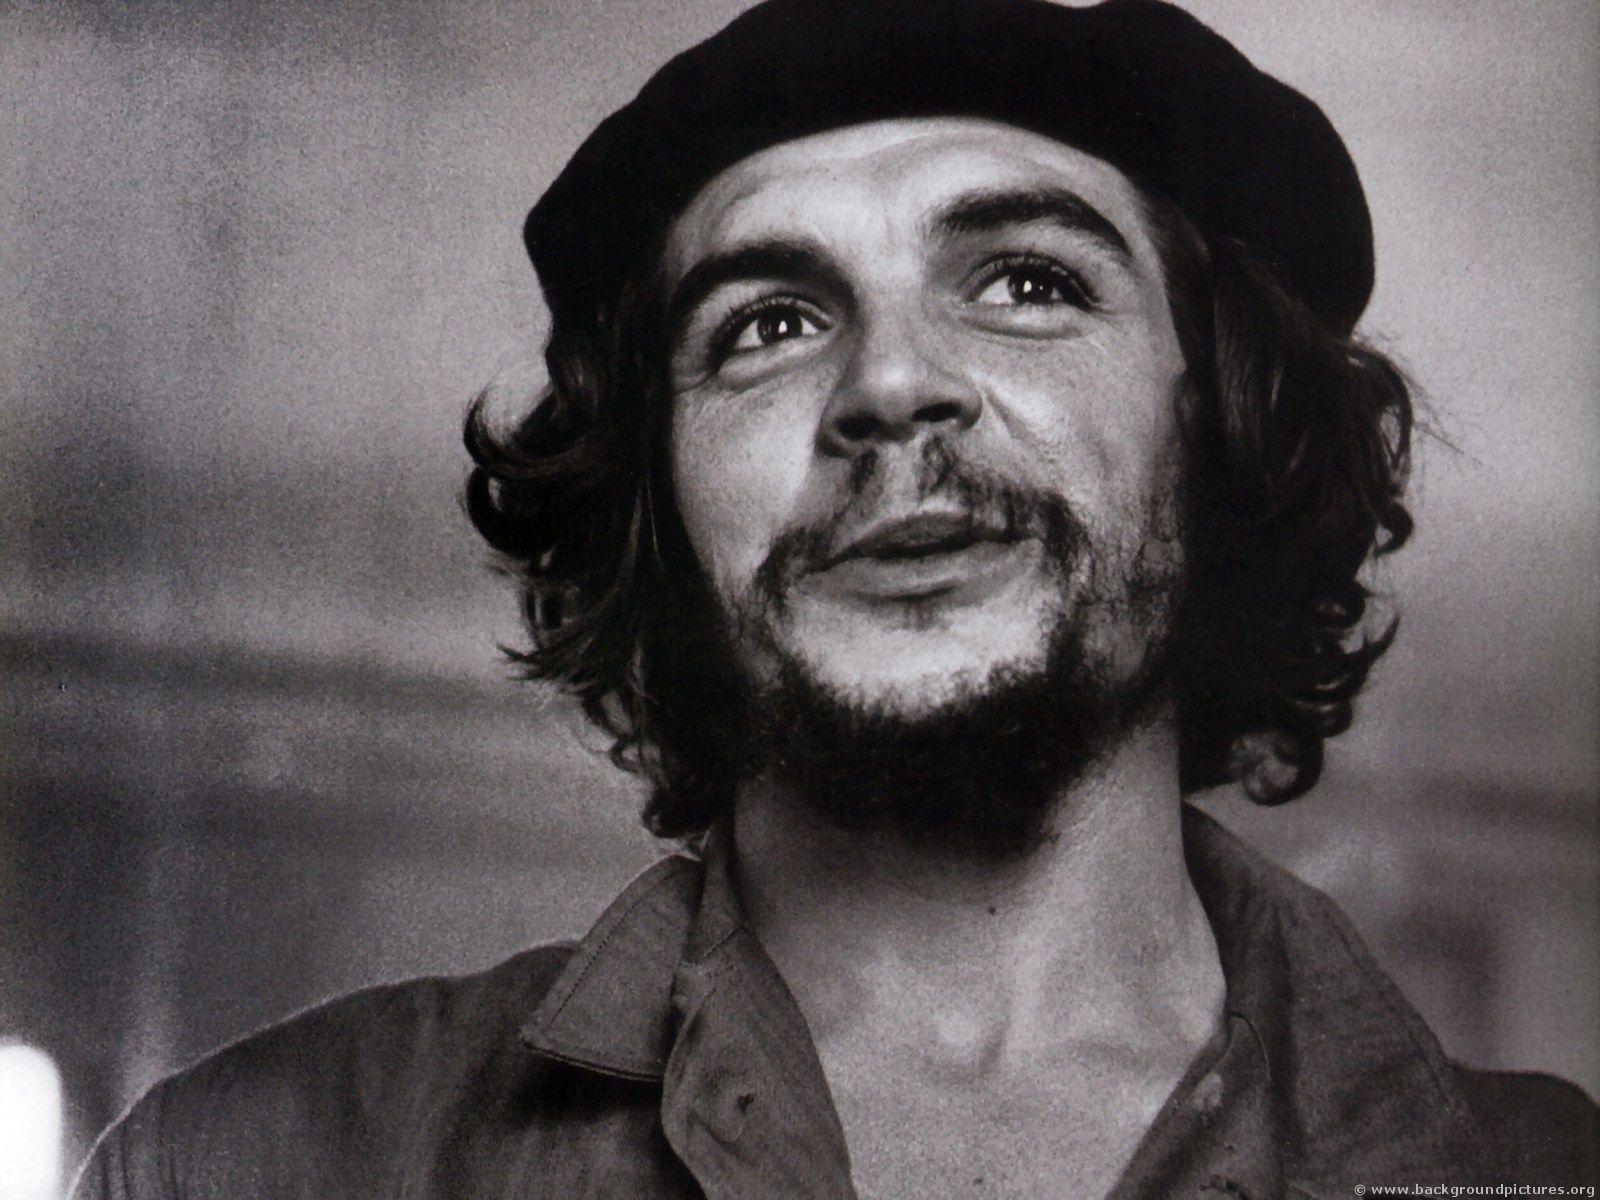 Download 1600x1200 px Che Guevara HD Wallpaper for Free